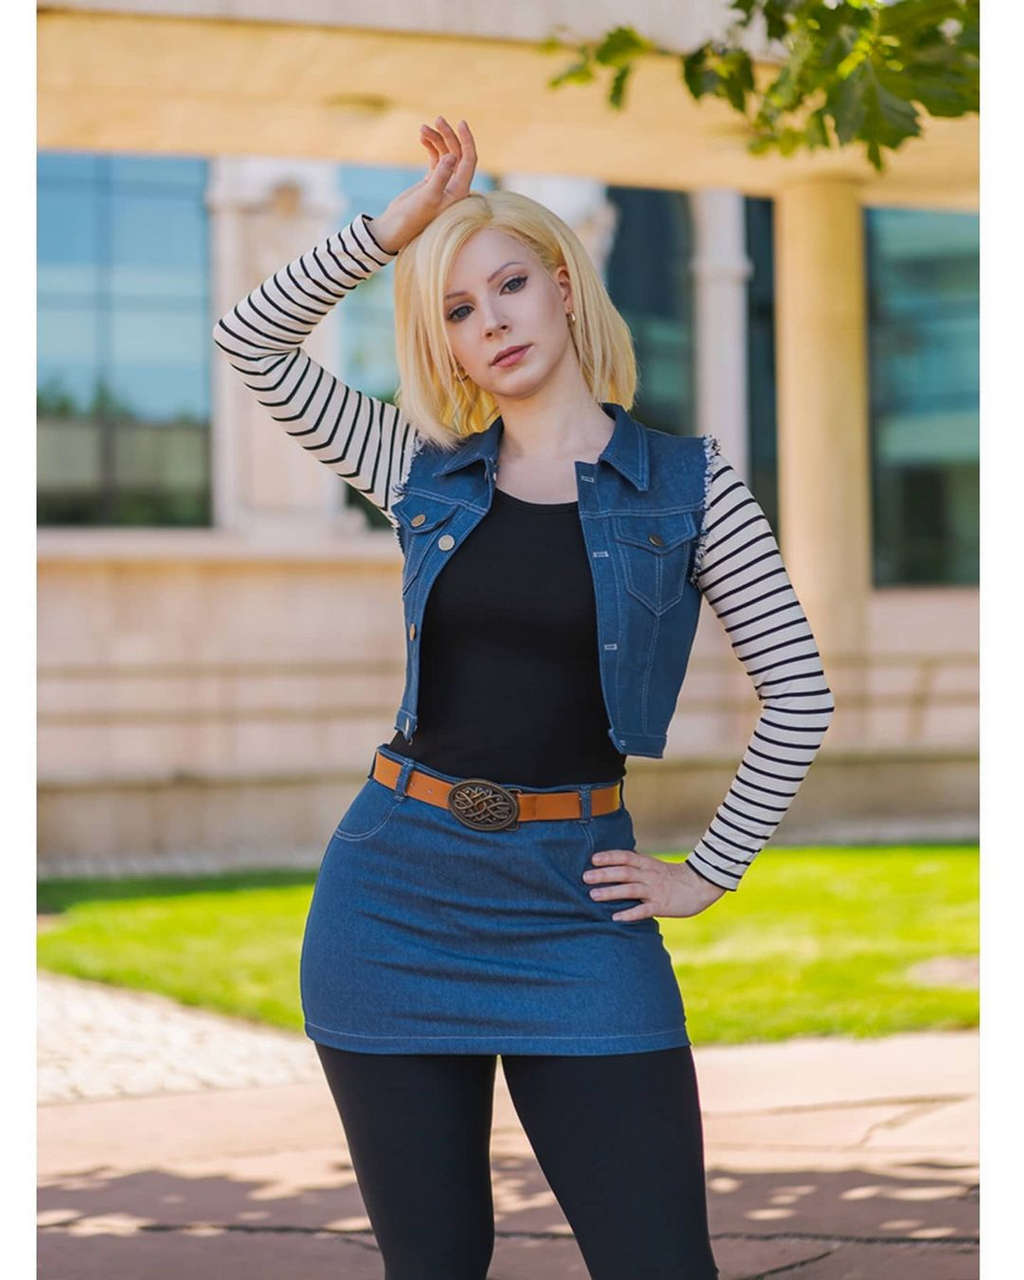 Android 18 By Enji Night